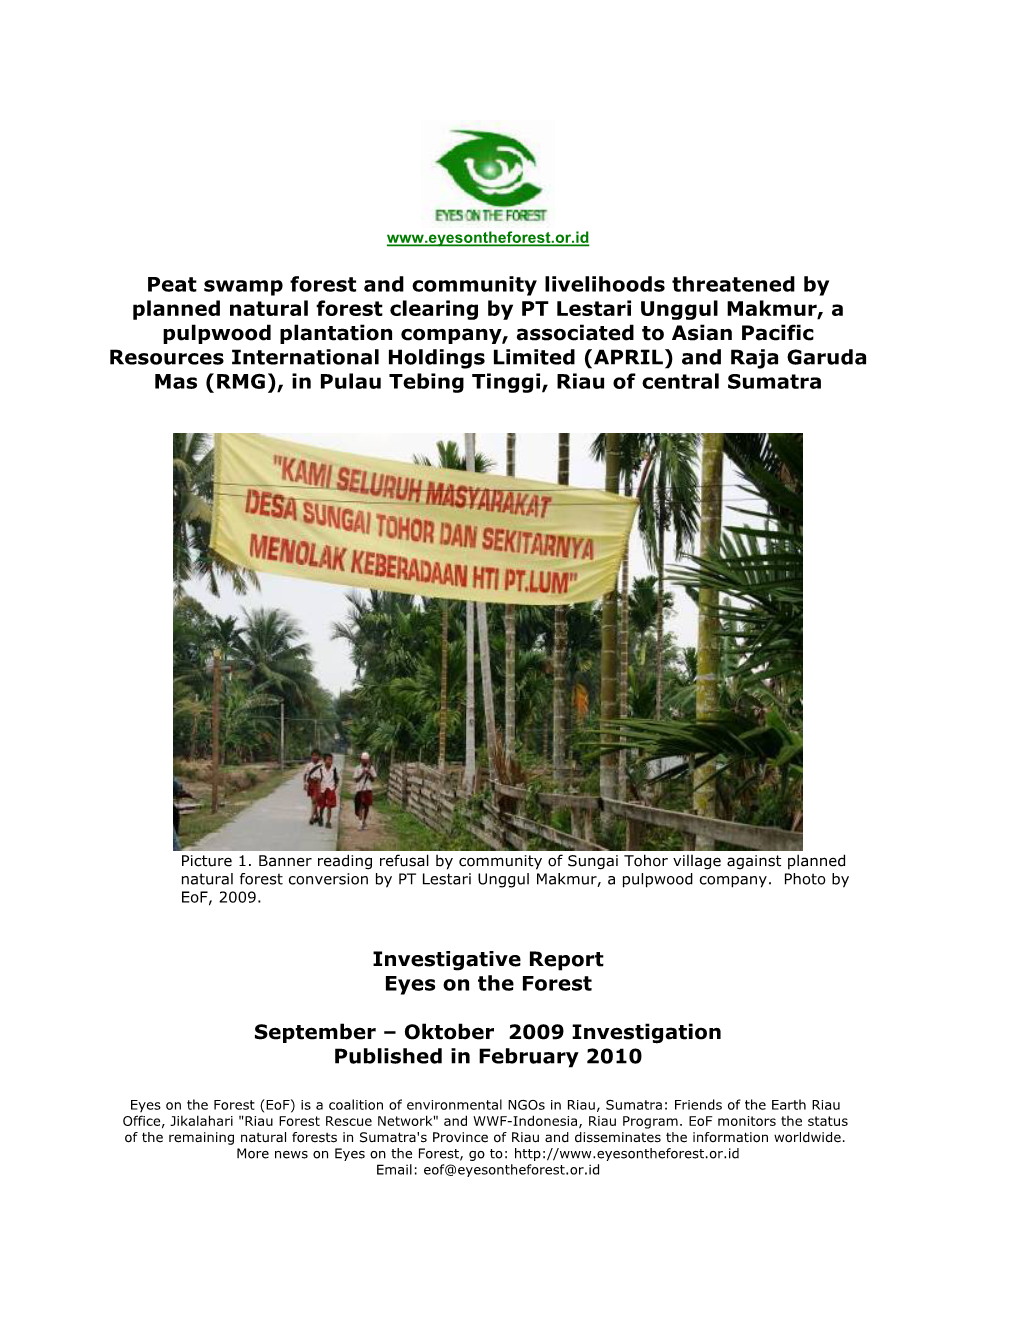 Peat Swamp Forest and Community Livelihoods Threatened by Planned